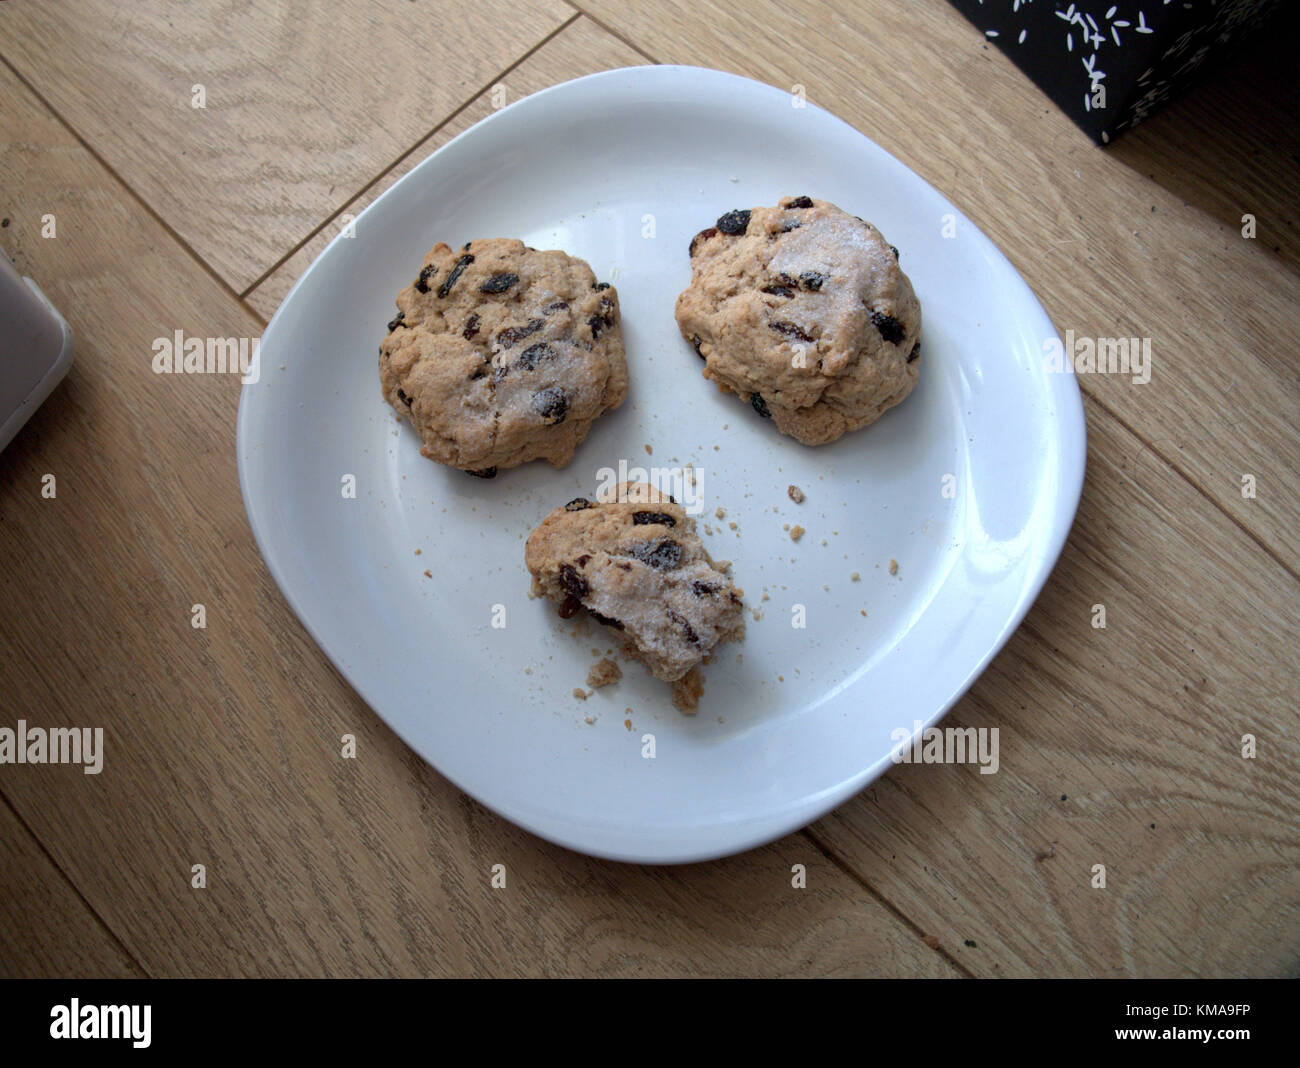 home made rock cakes eccles cakes buns or scones on a white plate country or county style Stock Photo